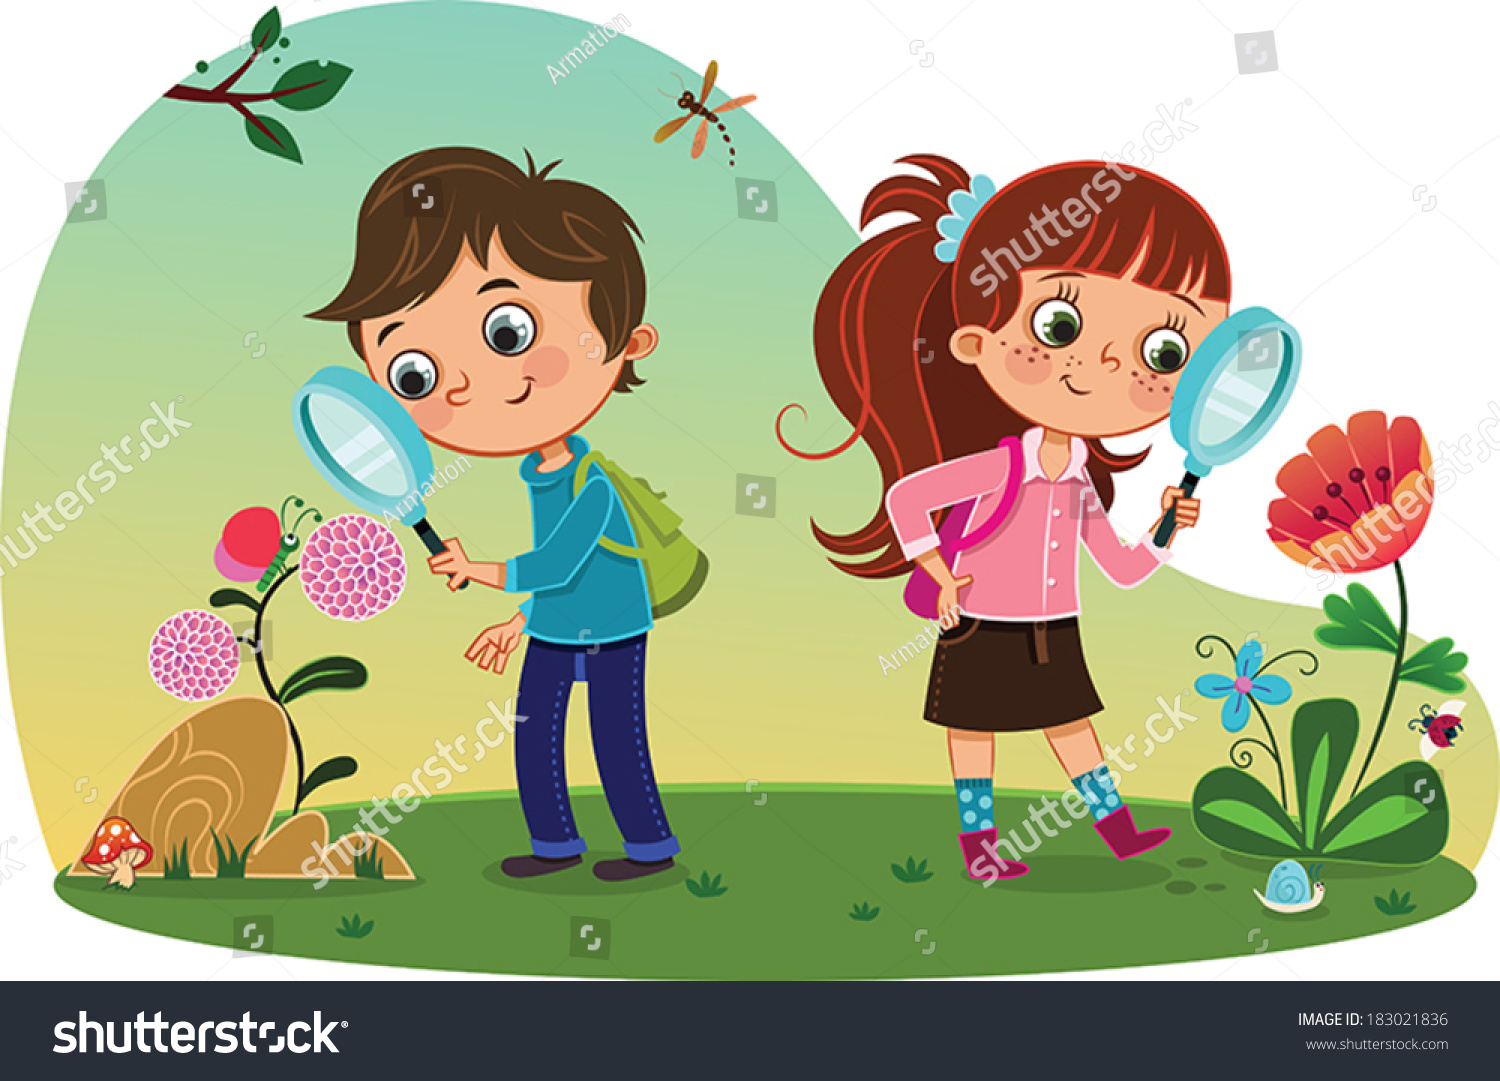 Nature clipart for kids